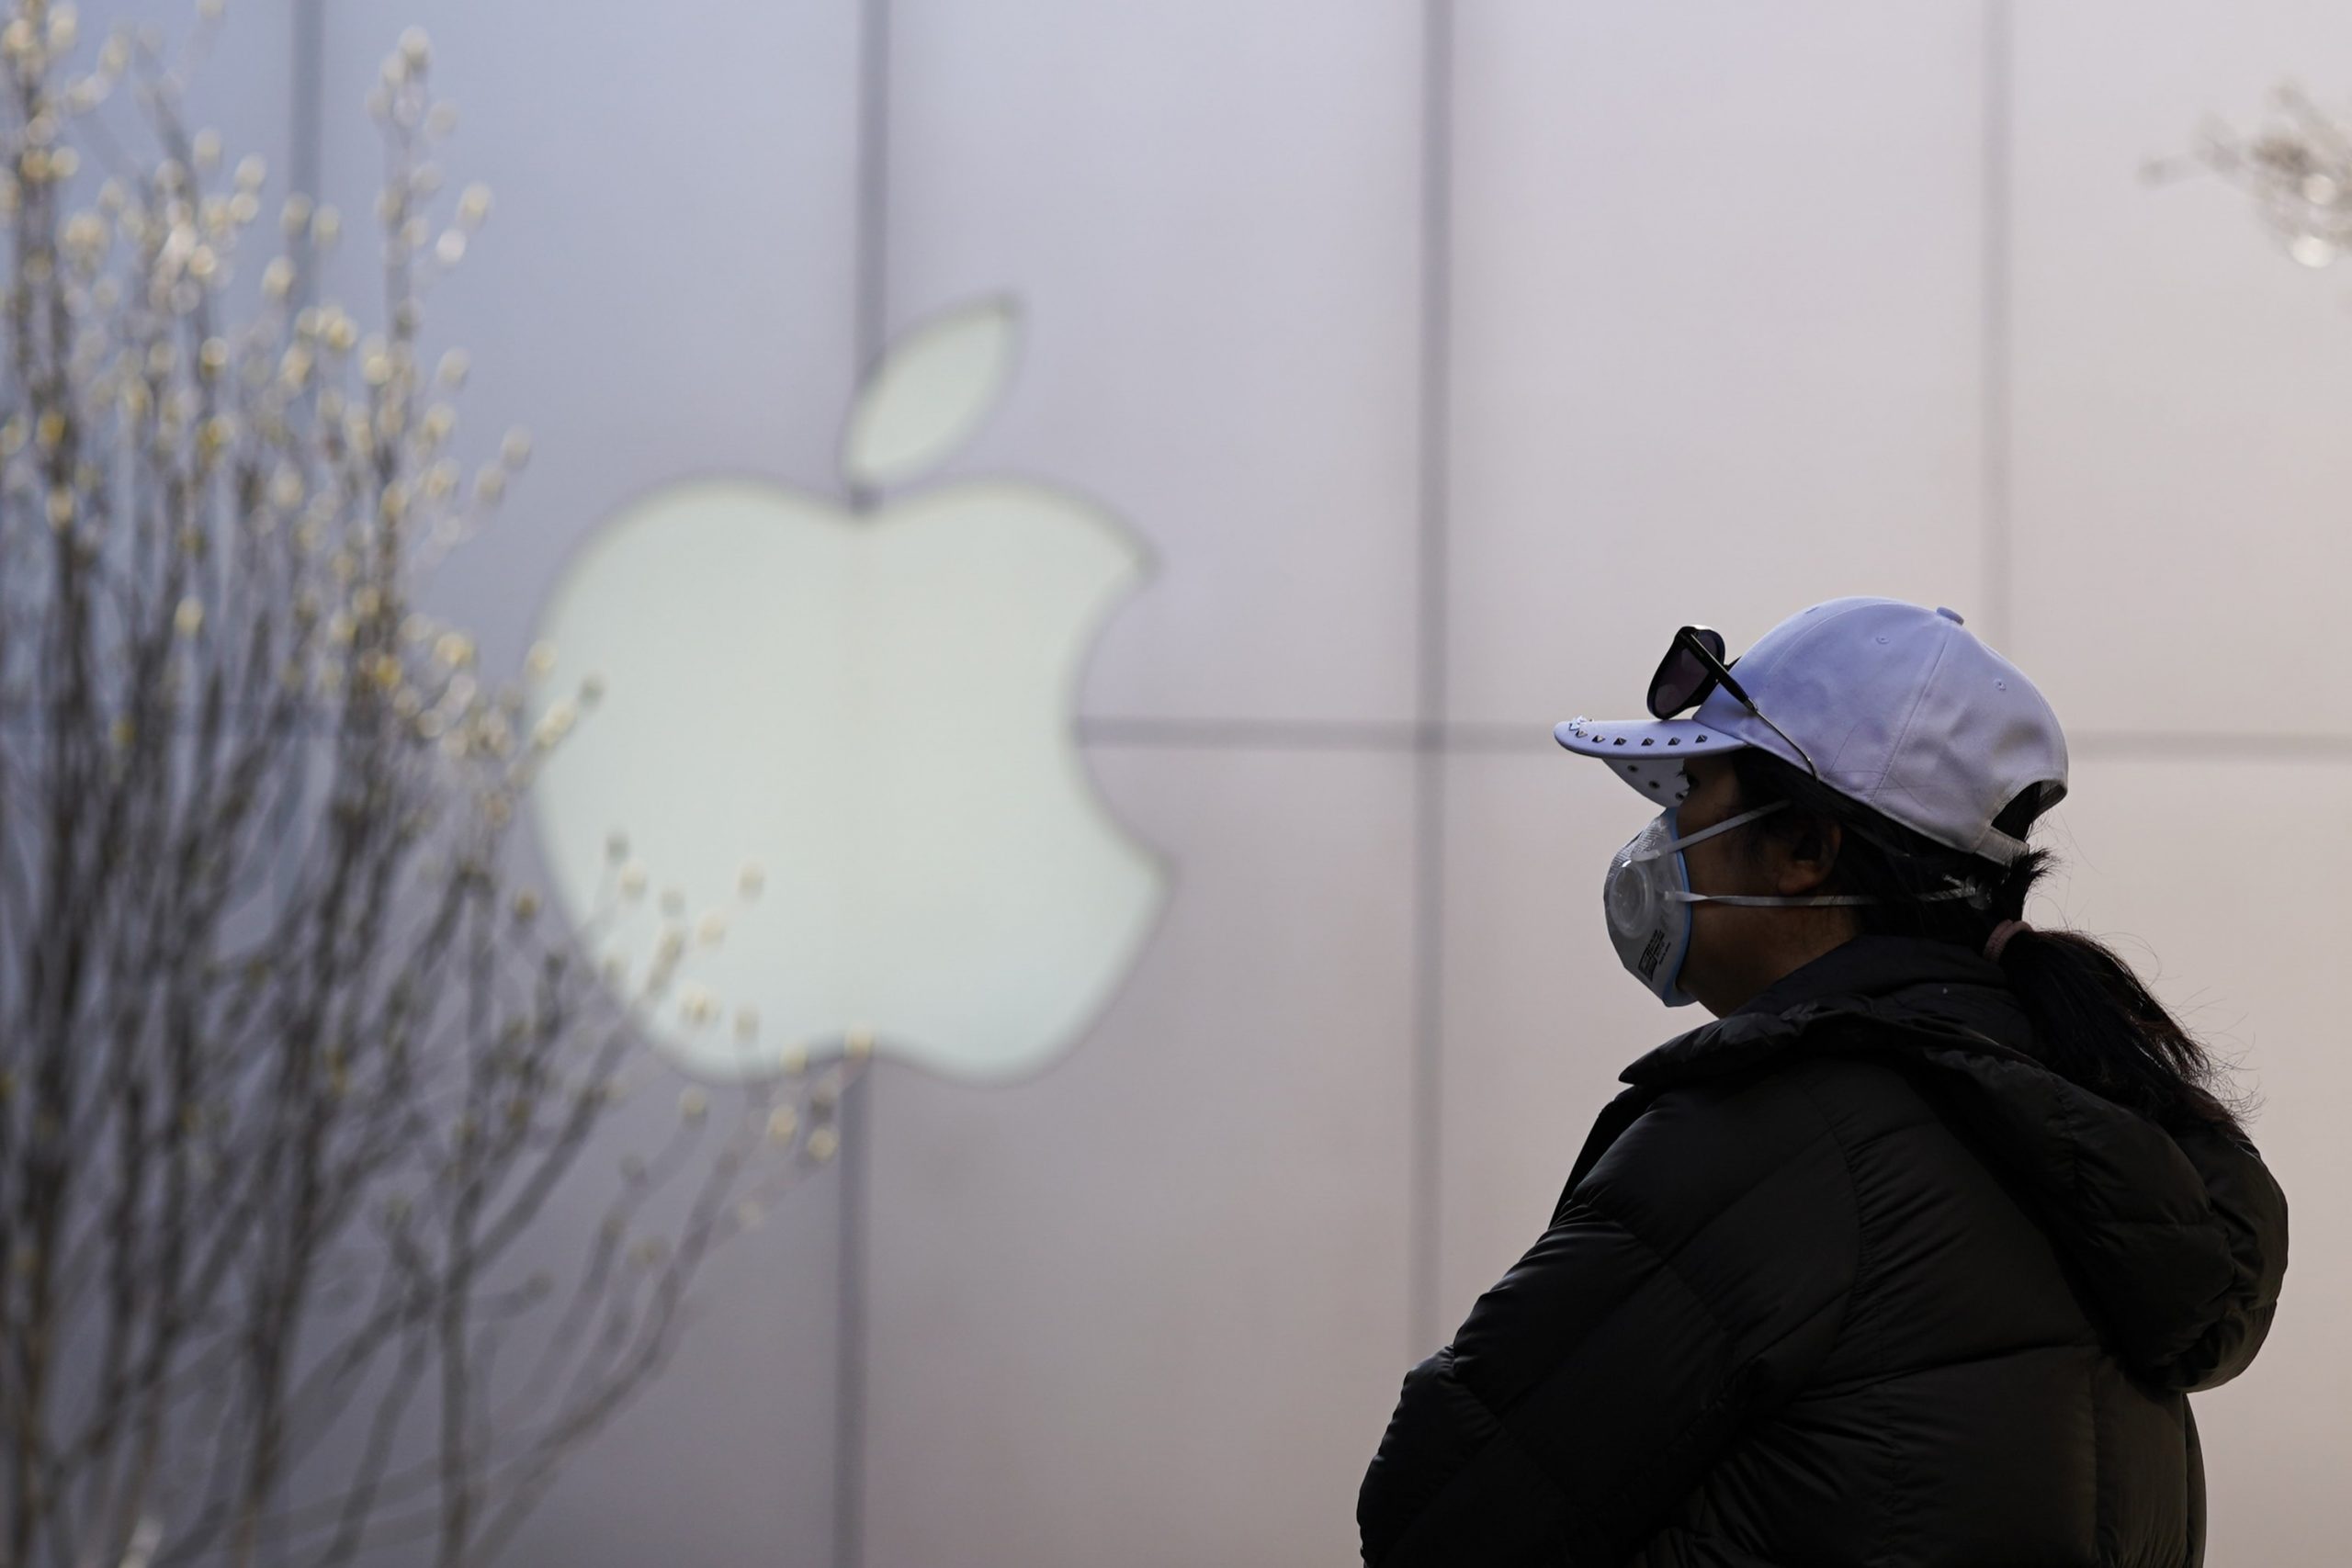 iPhone to your door: Chinese firms test super-fast phone delivery as coronavirus caution remains